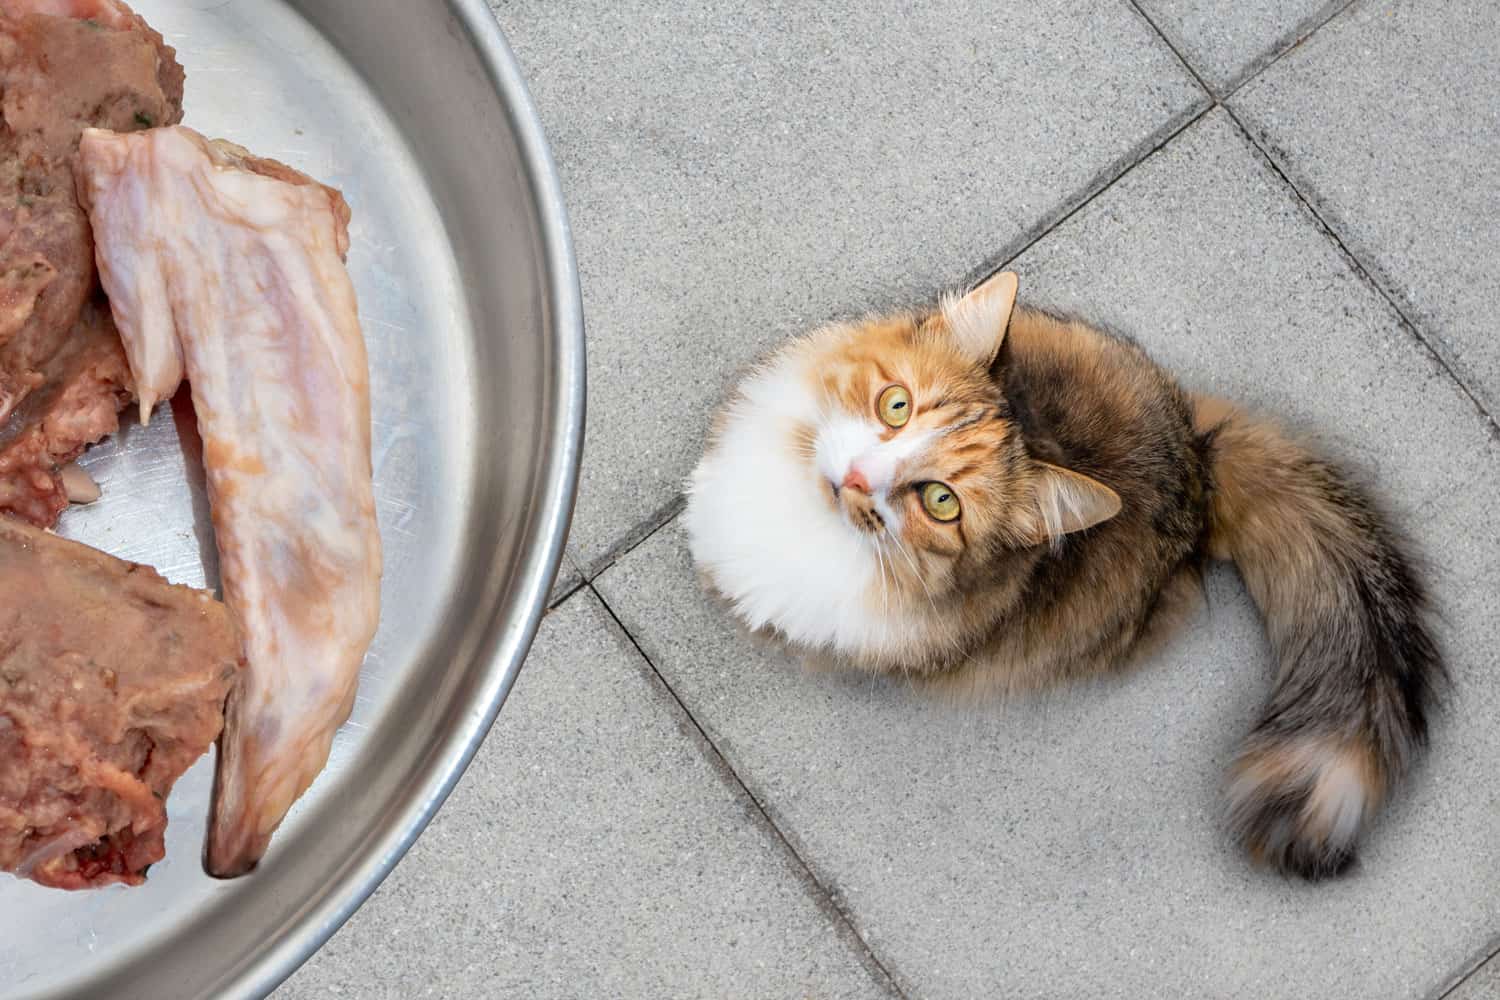 Cat with raw food, top view. The kitty is feed a chicken wing tip and raw ground chicken meat. Concept for raw food diet. Long hair calico or torbie female cat starring intense at the food bowl.
